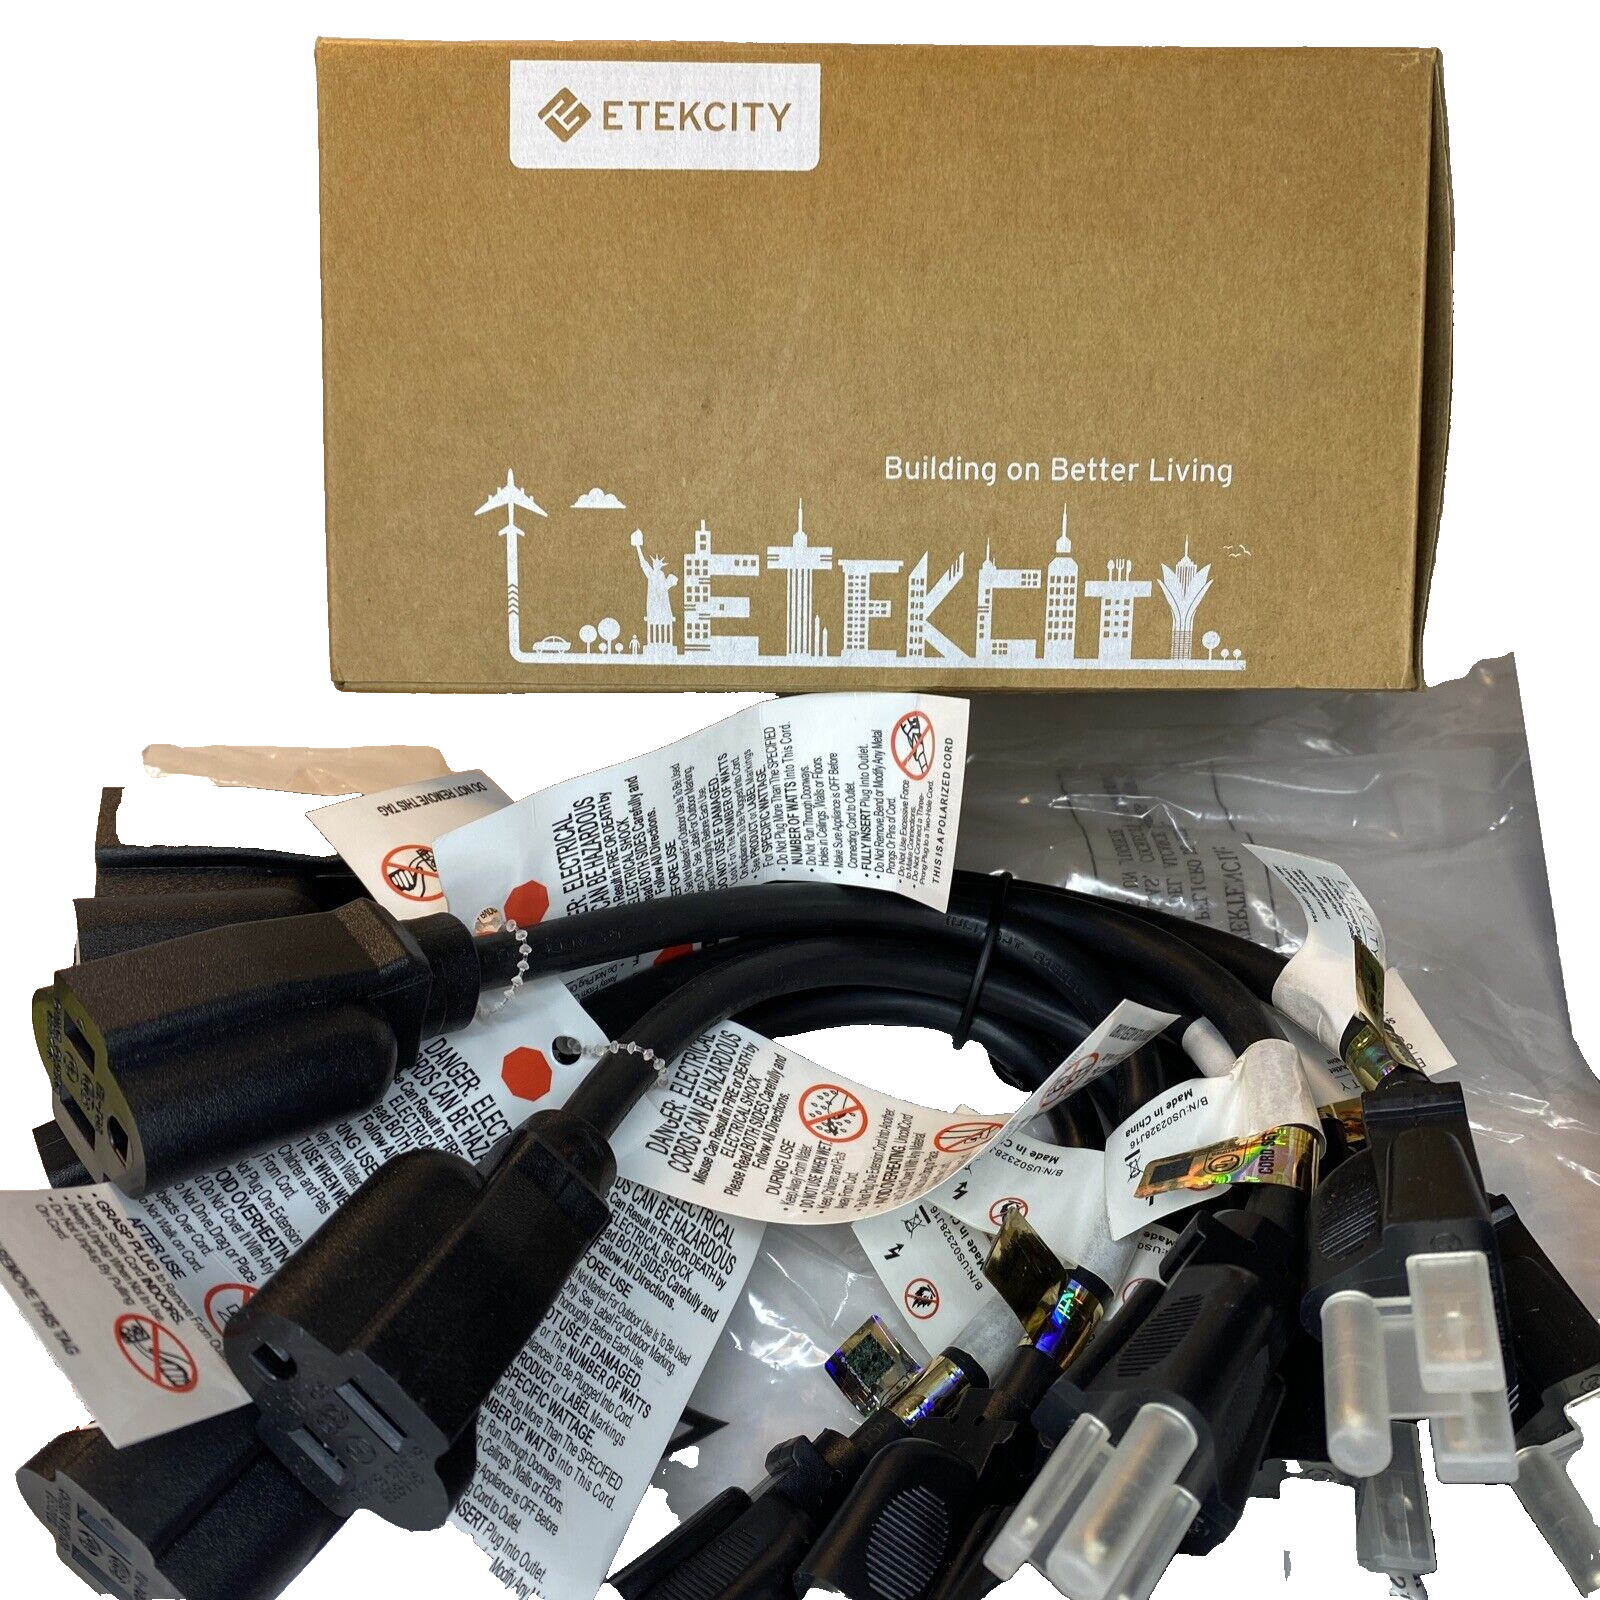 Etekcity 10 pack One Foot Extension Cables/ NEW box